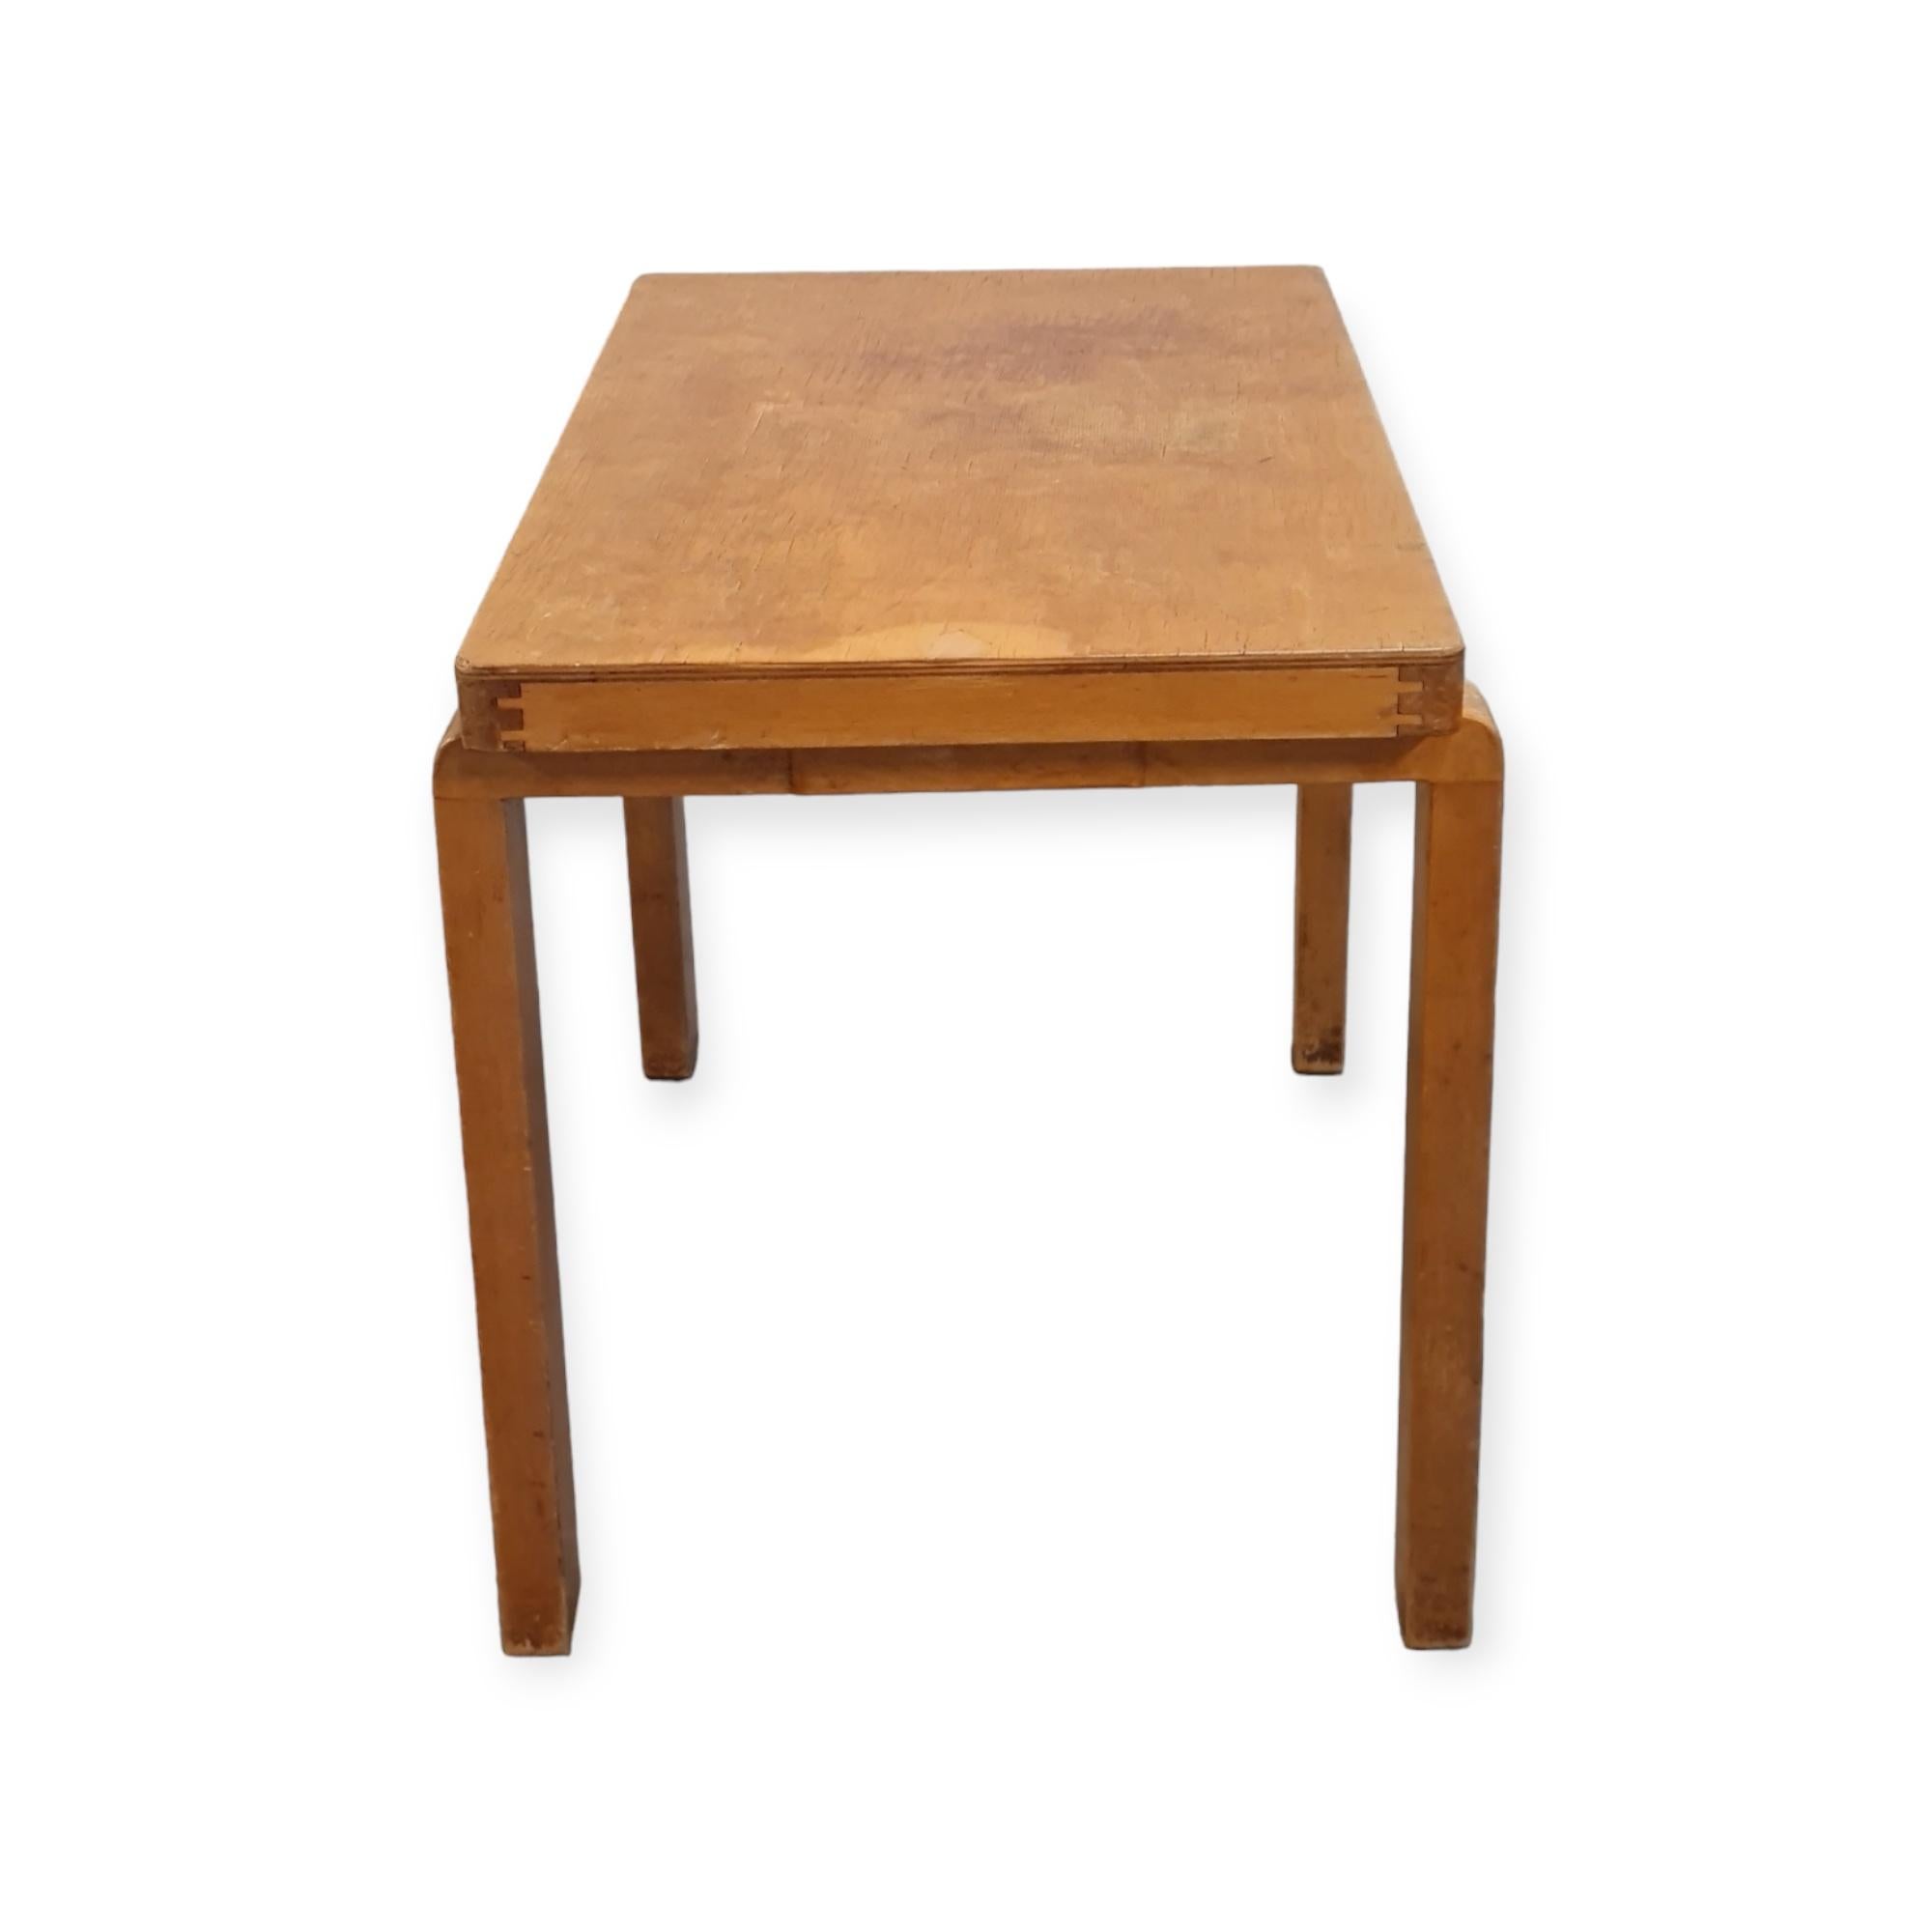 Finnish An Exceptionally Rare Alvar Aalto War-time Side table, 1940s For Sale